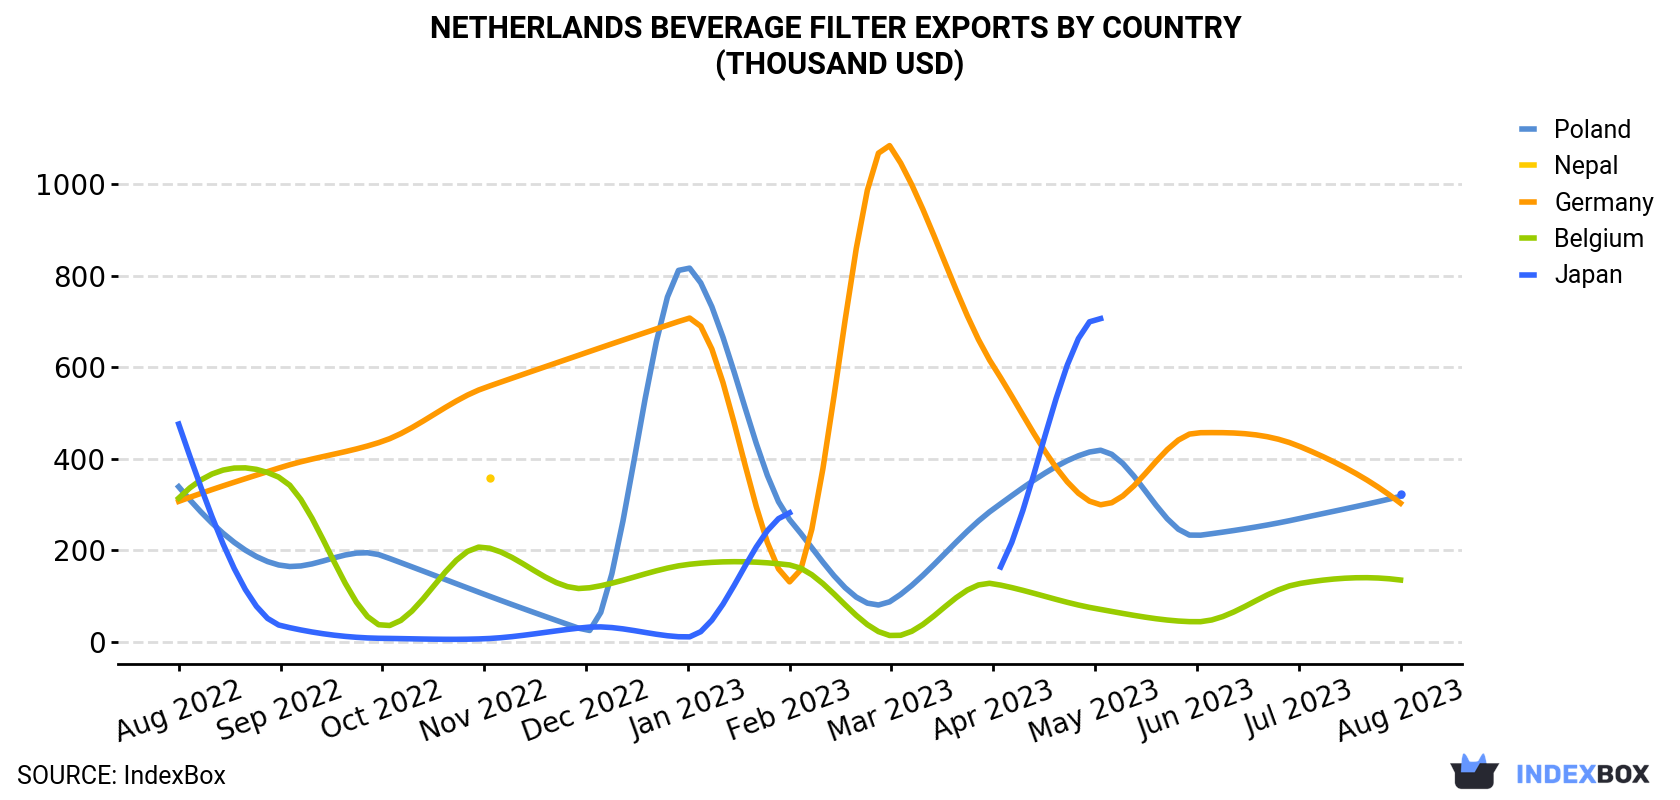 Netherlands Beverage Filter Exports By Country (Thousand USD)